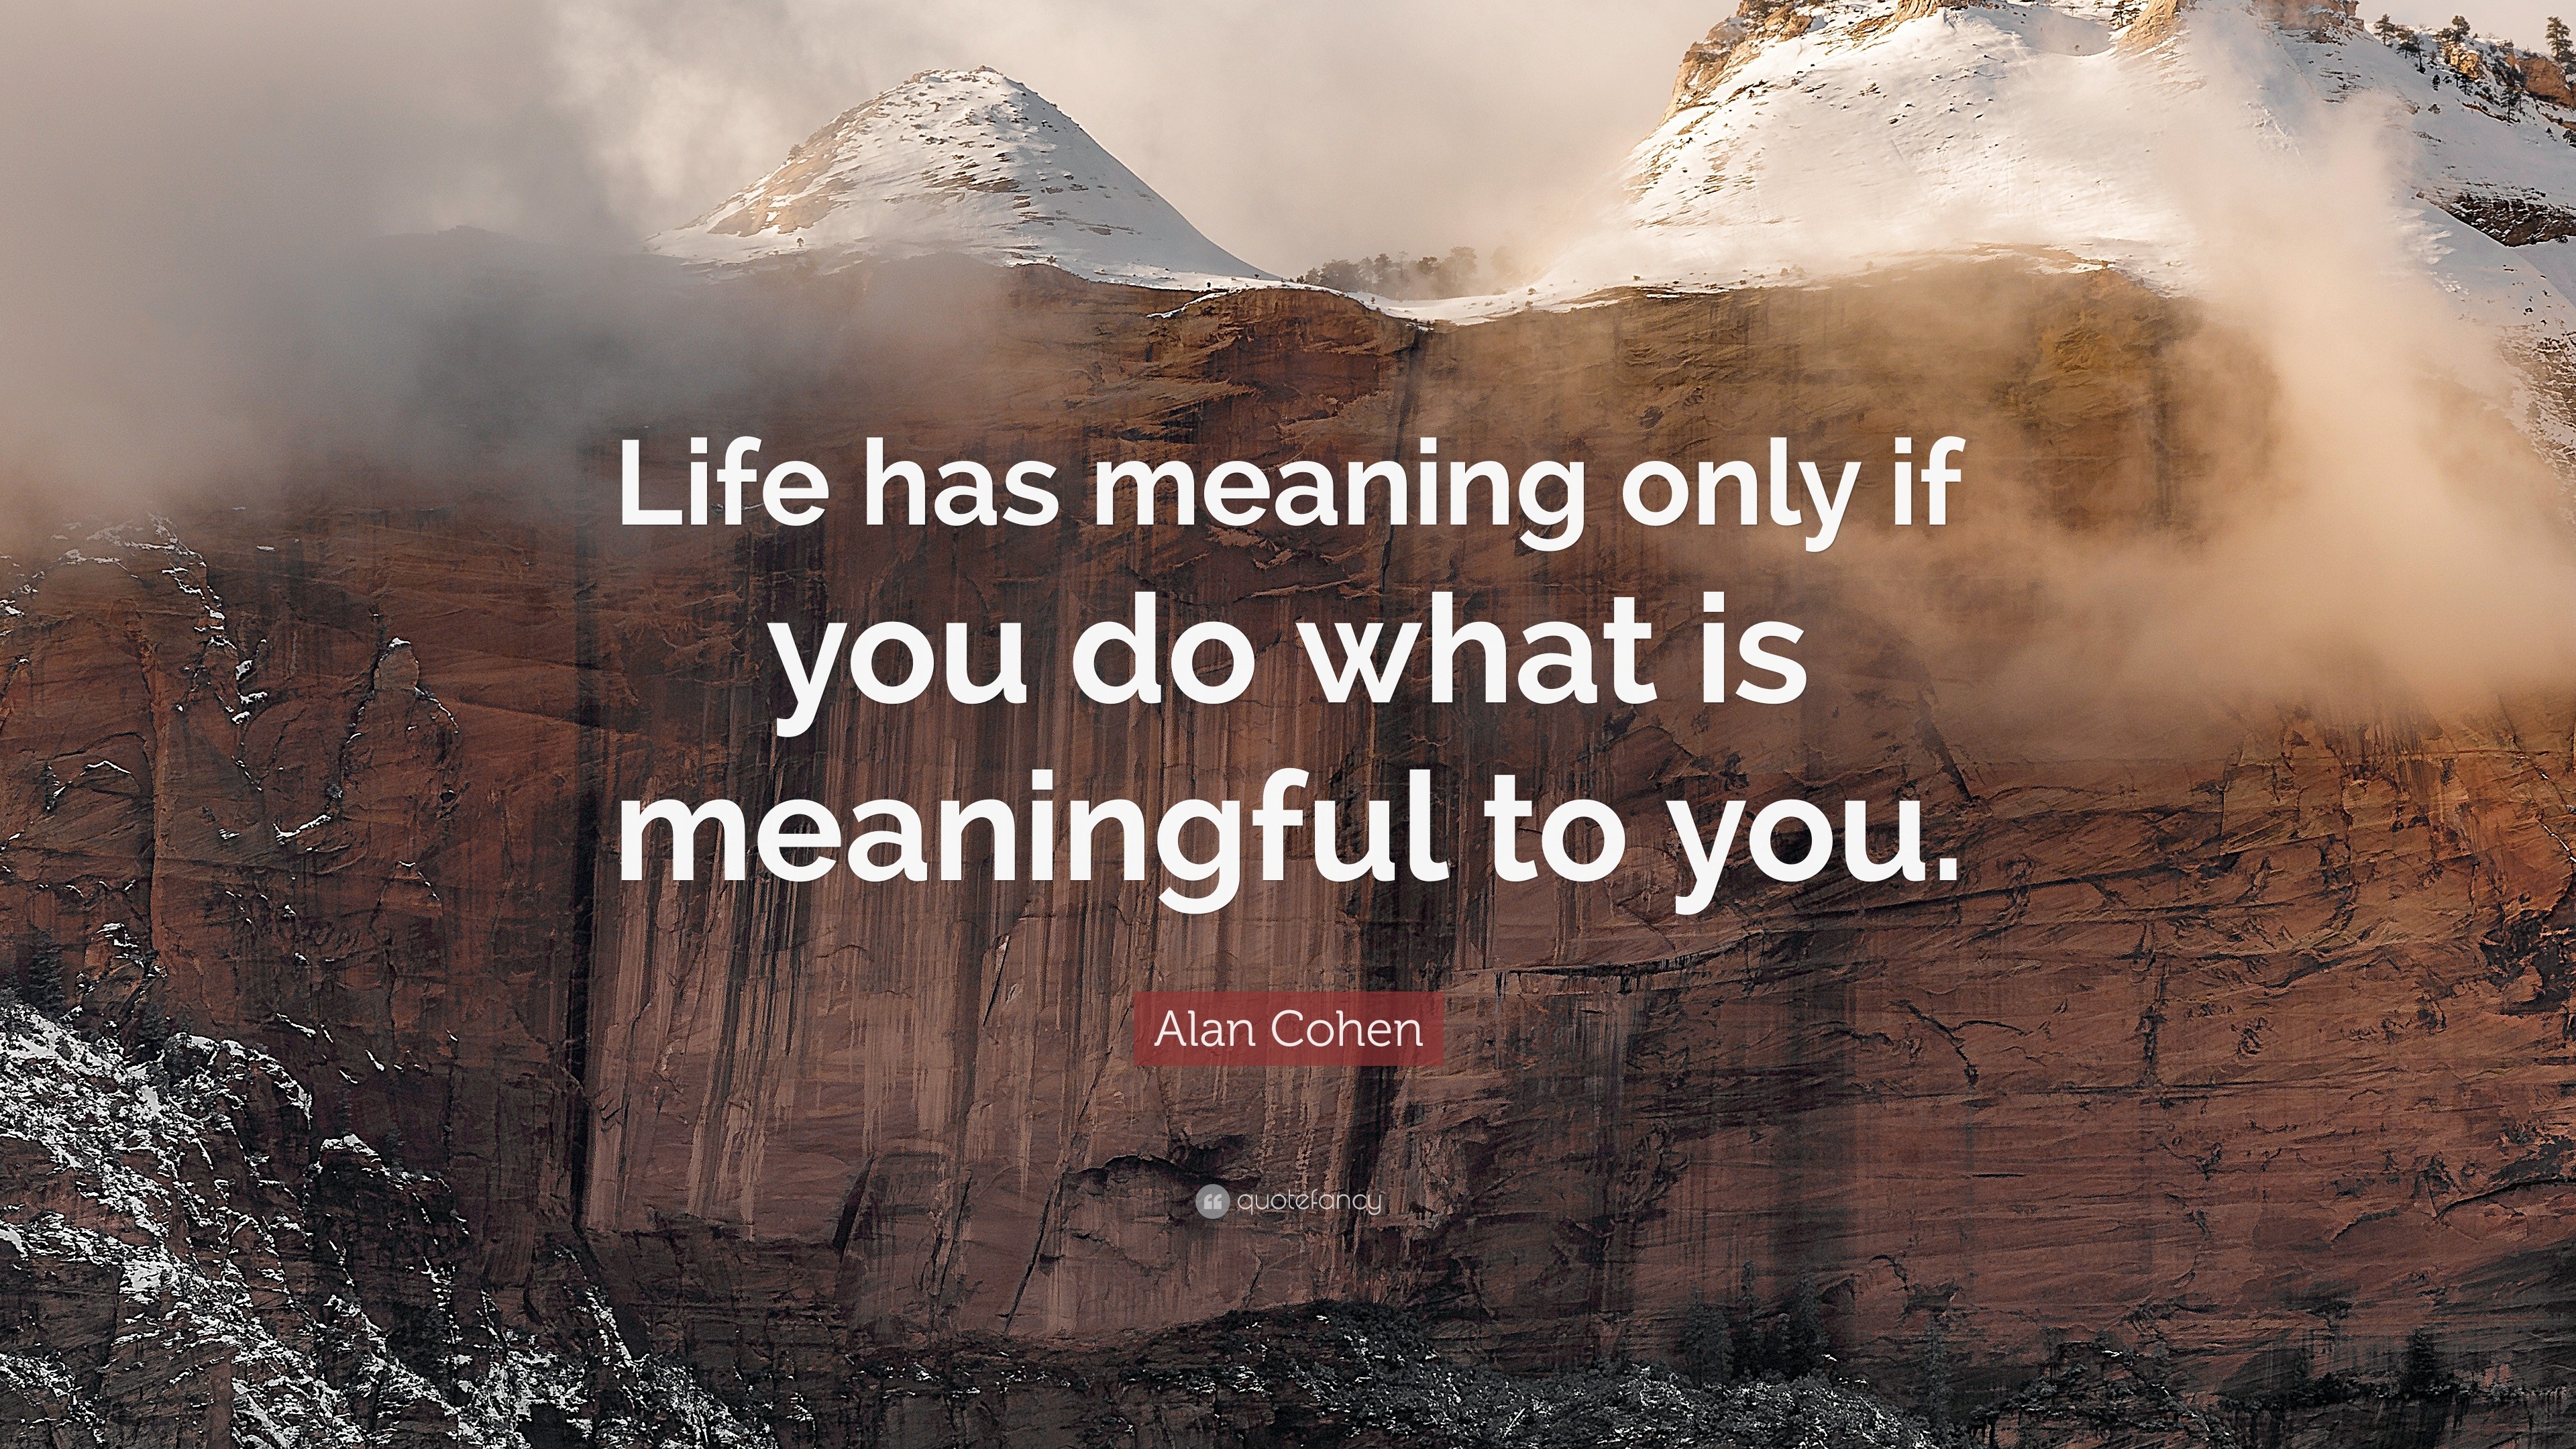 Alan Cohen Quote: “Life has meaning only if you do what is meaningful